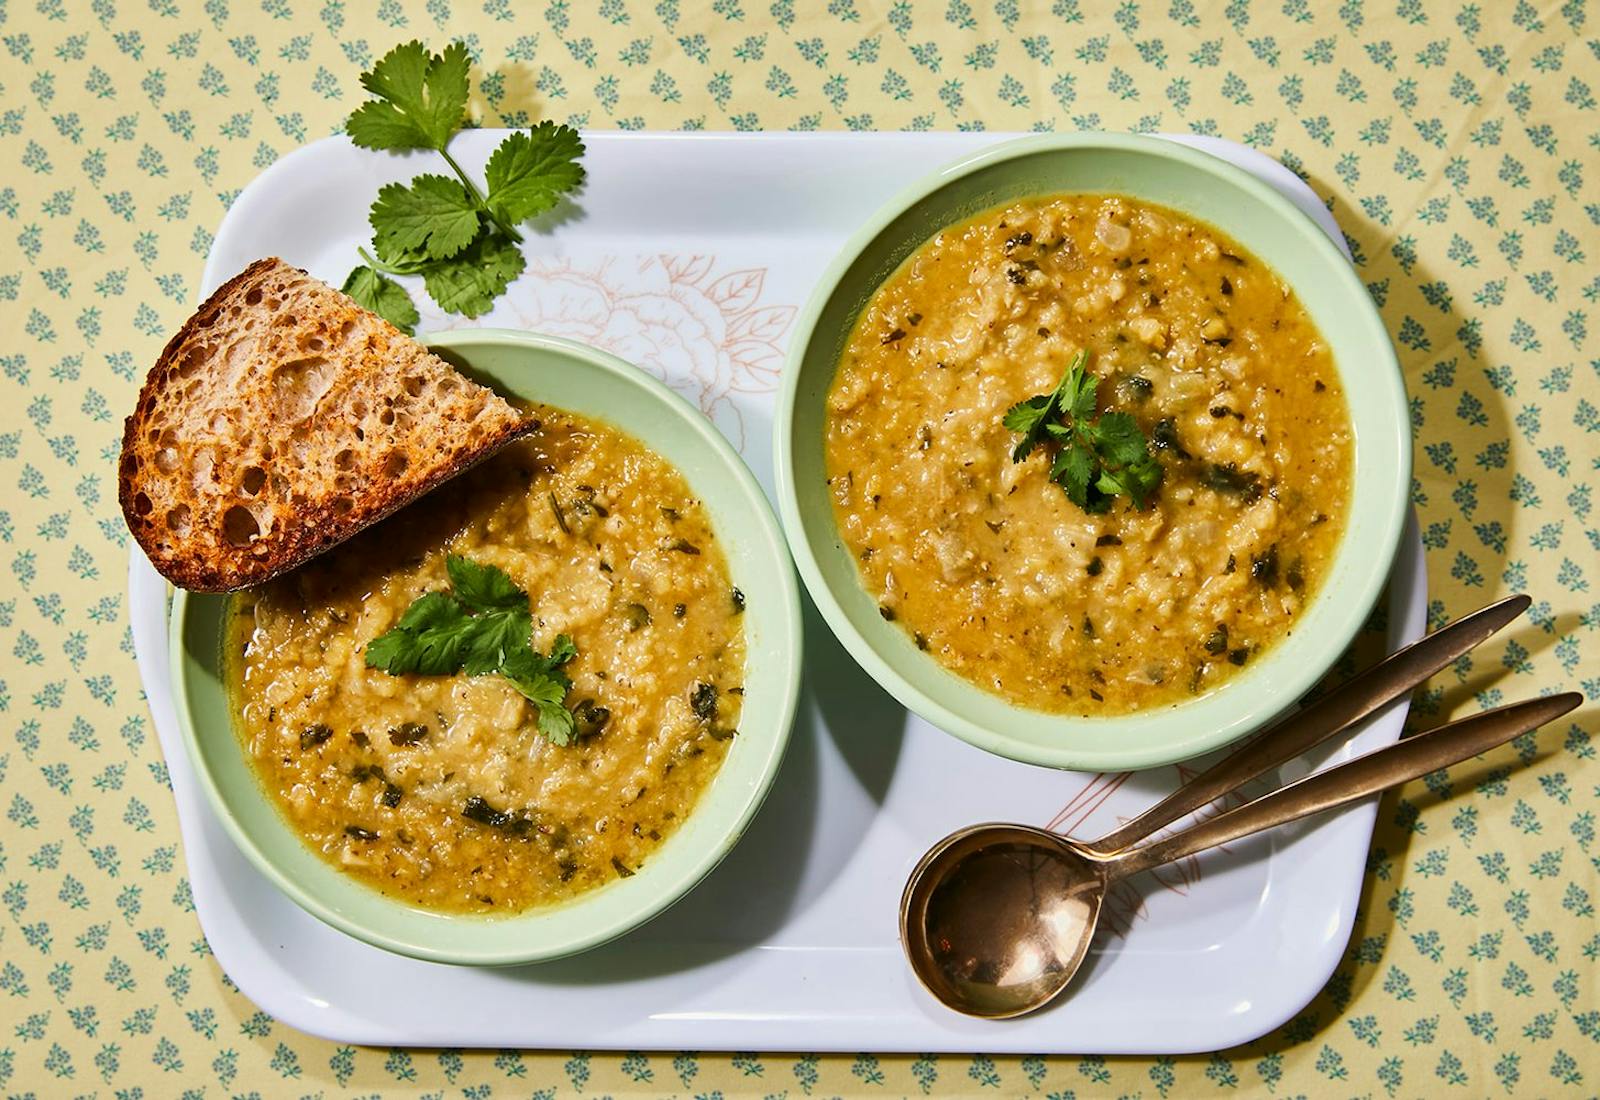 Two bowls of soup with cilantro, toasted bread, atop yellow and blue tablecloth.